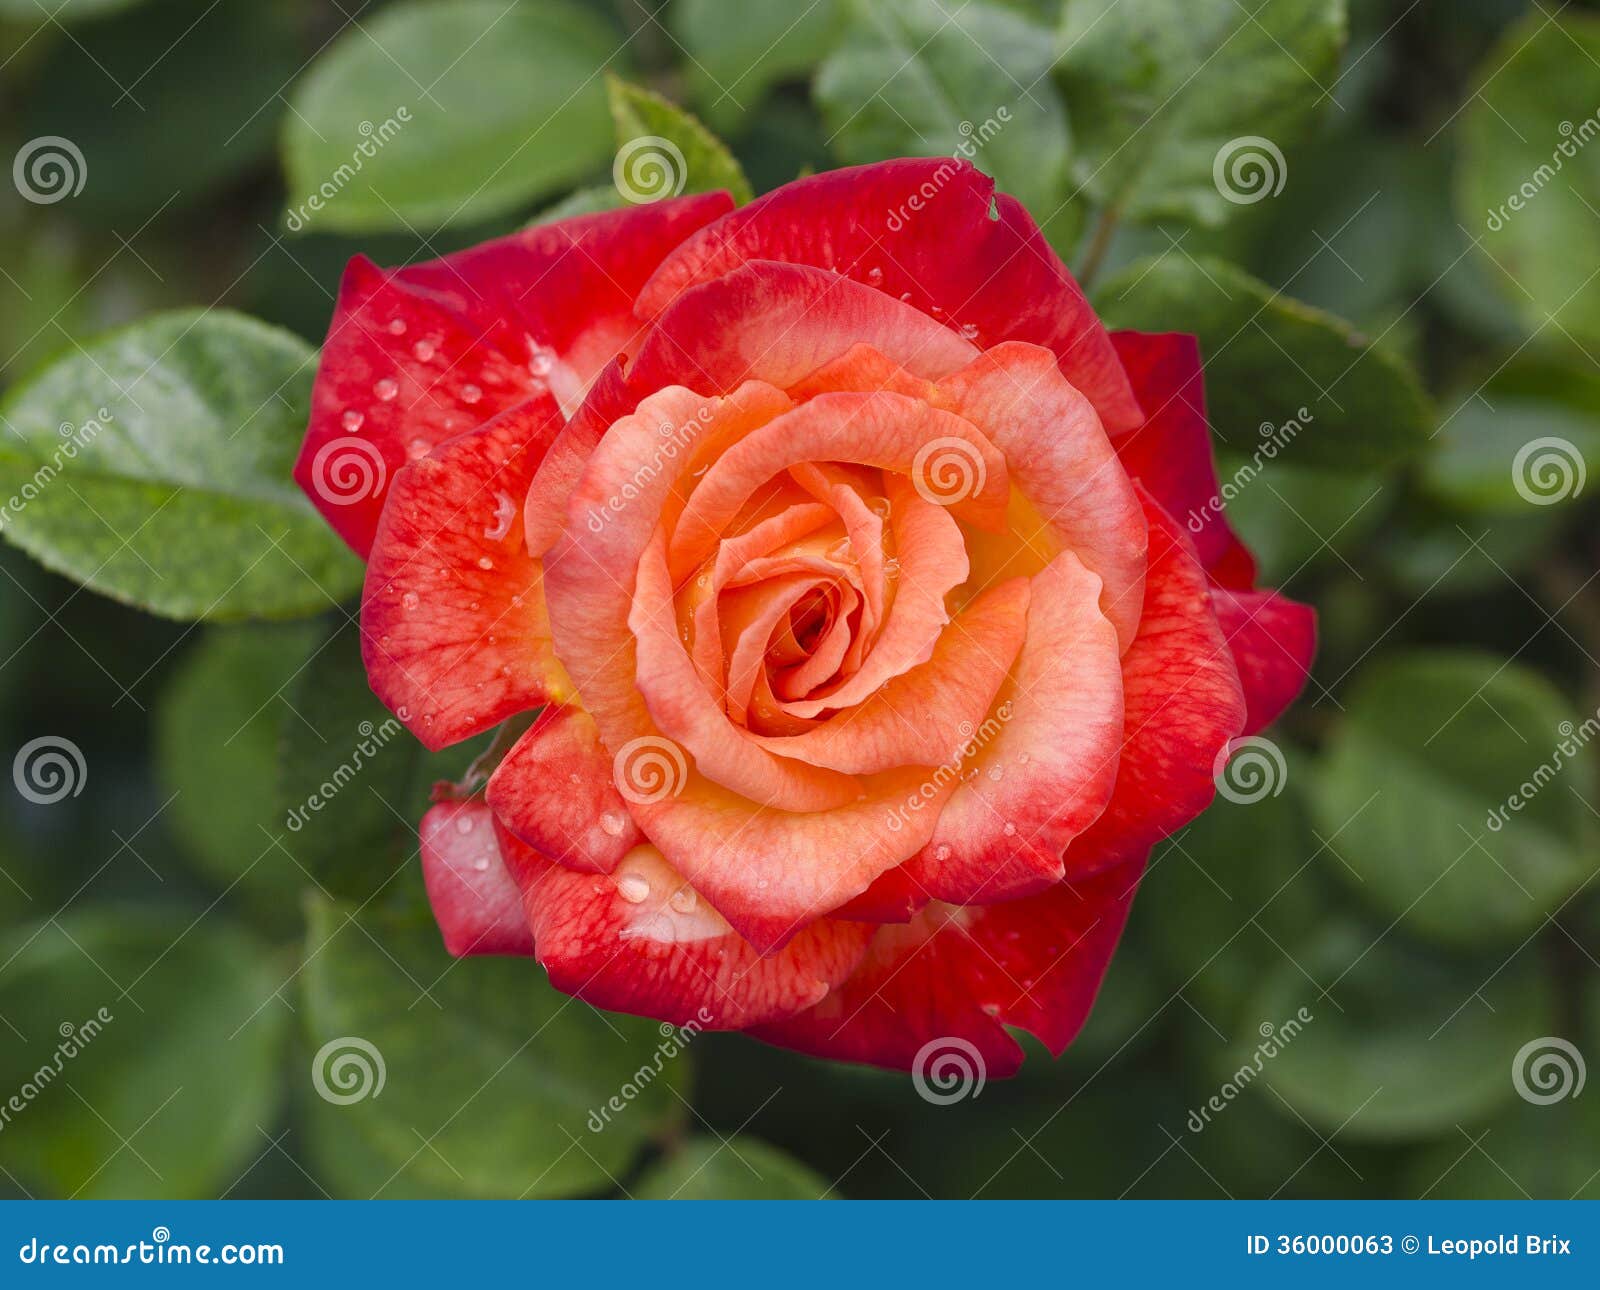 Rose Pigalle #2 stock image. Image of blooming, pigalle - 36000063